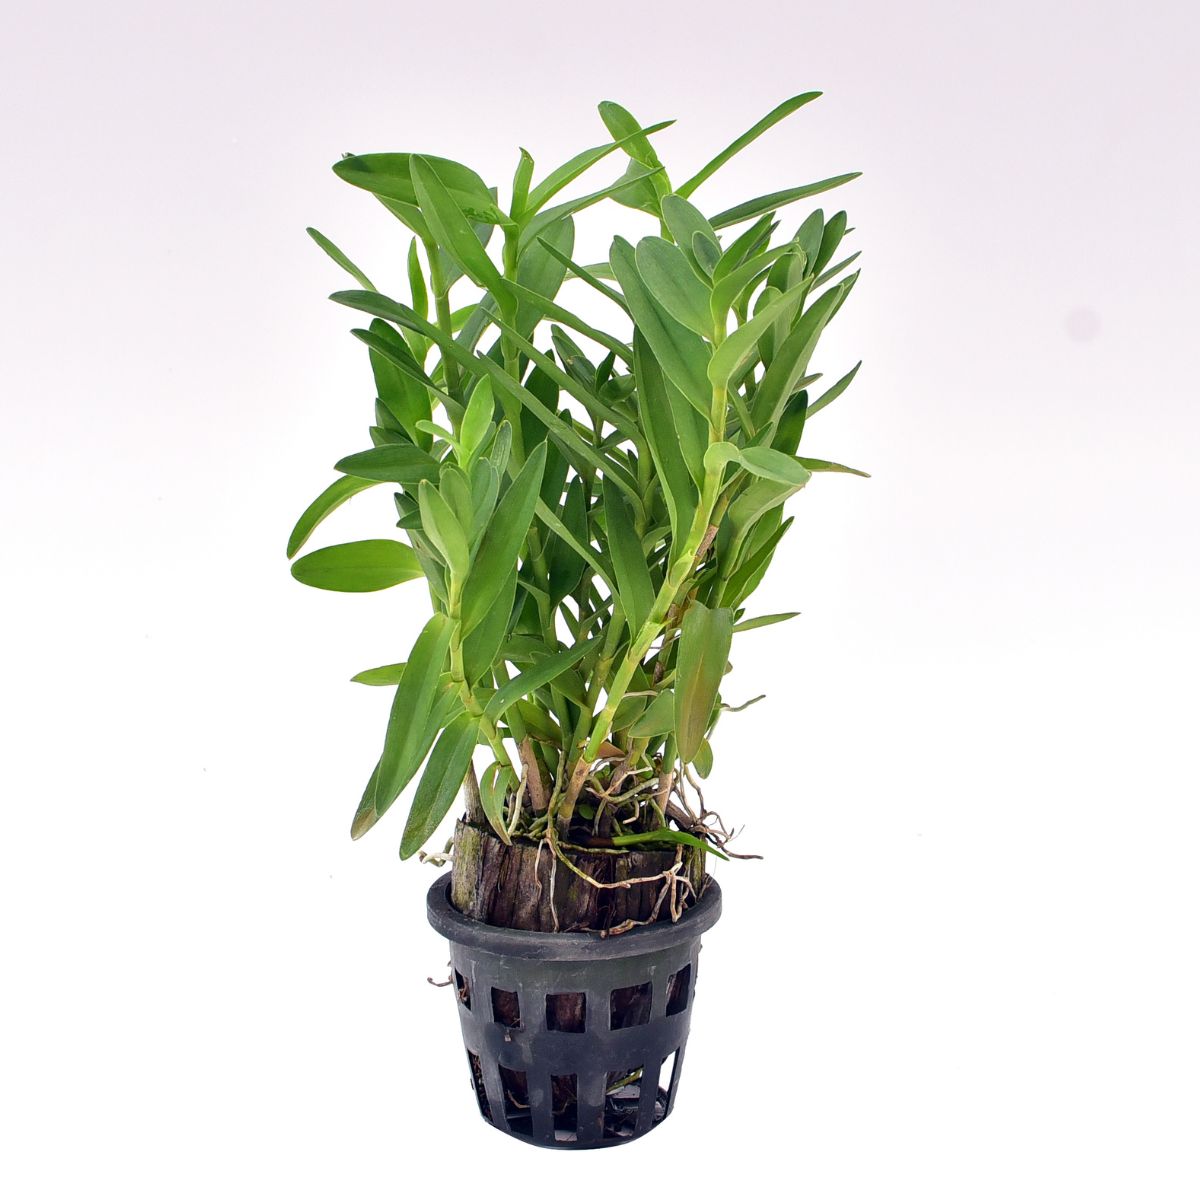 Epidendrum Wedding Valley Yukimai Orchid - Blooming Size Plant for Instant Beauty and Timeless Elegance